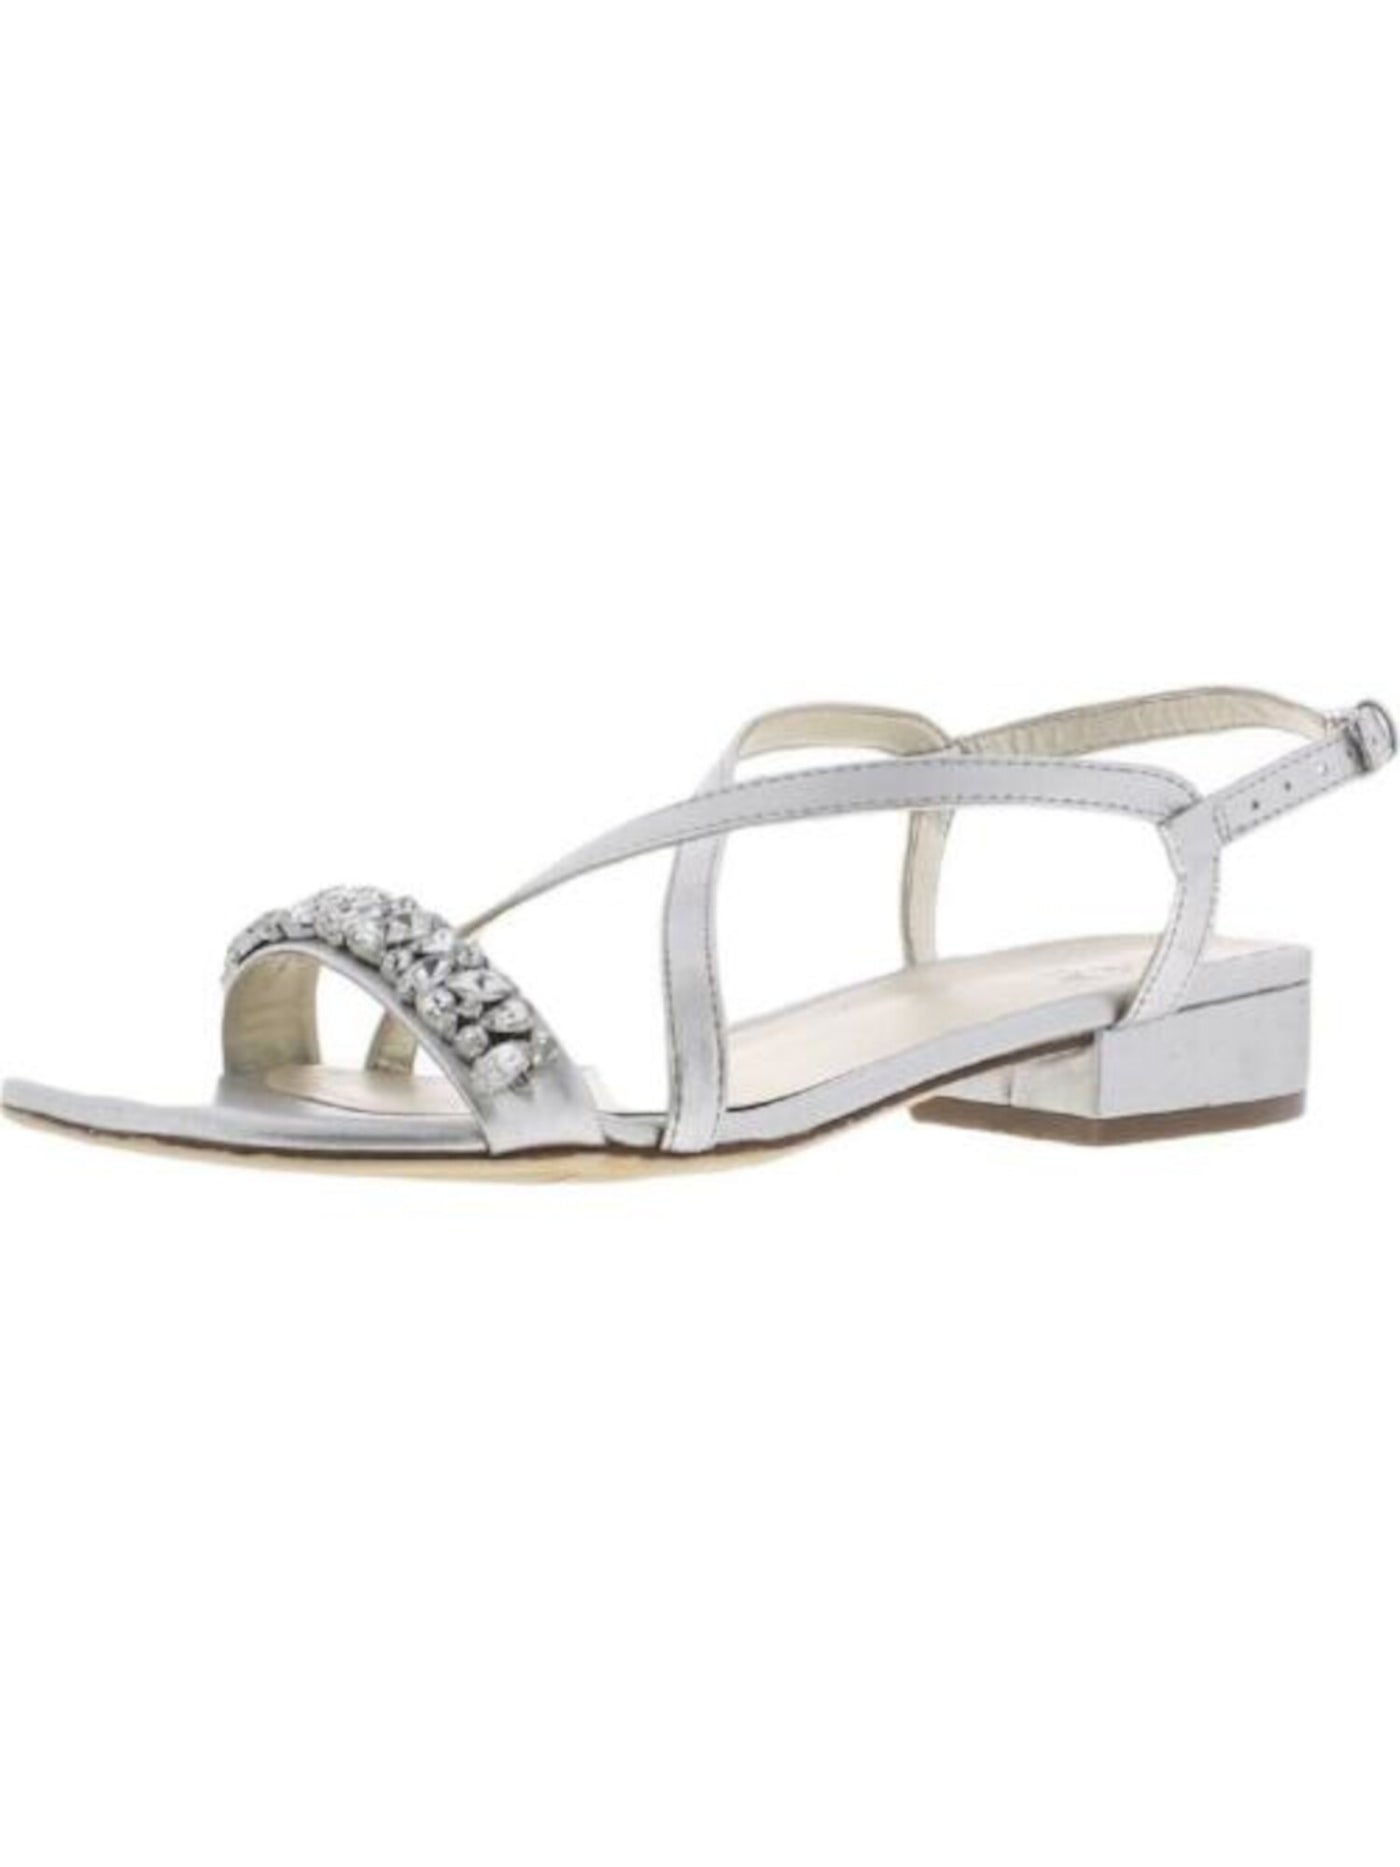 NATURALIZER Womens Silver Breathable Strappy Rhinestone Cushioned Macy Round Toe Buckle Slingback Sandal 6 M